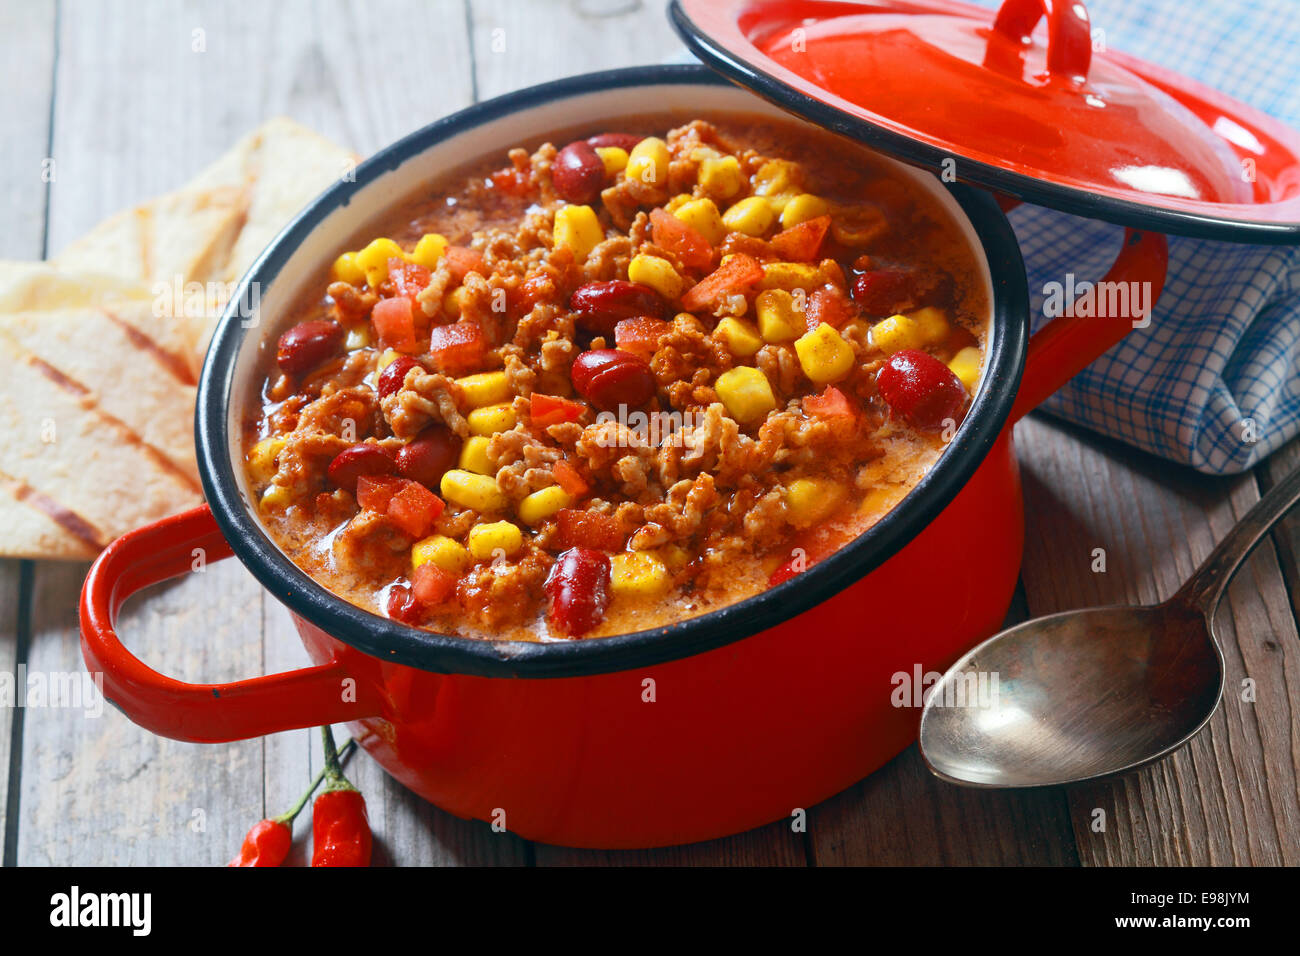 Close up Appetizing Healthy Meaty Dish on Red Pot with Serving Spoon on Side. Placed on Wooden Table. Stock Photo